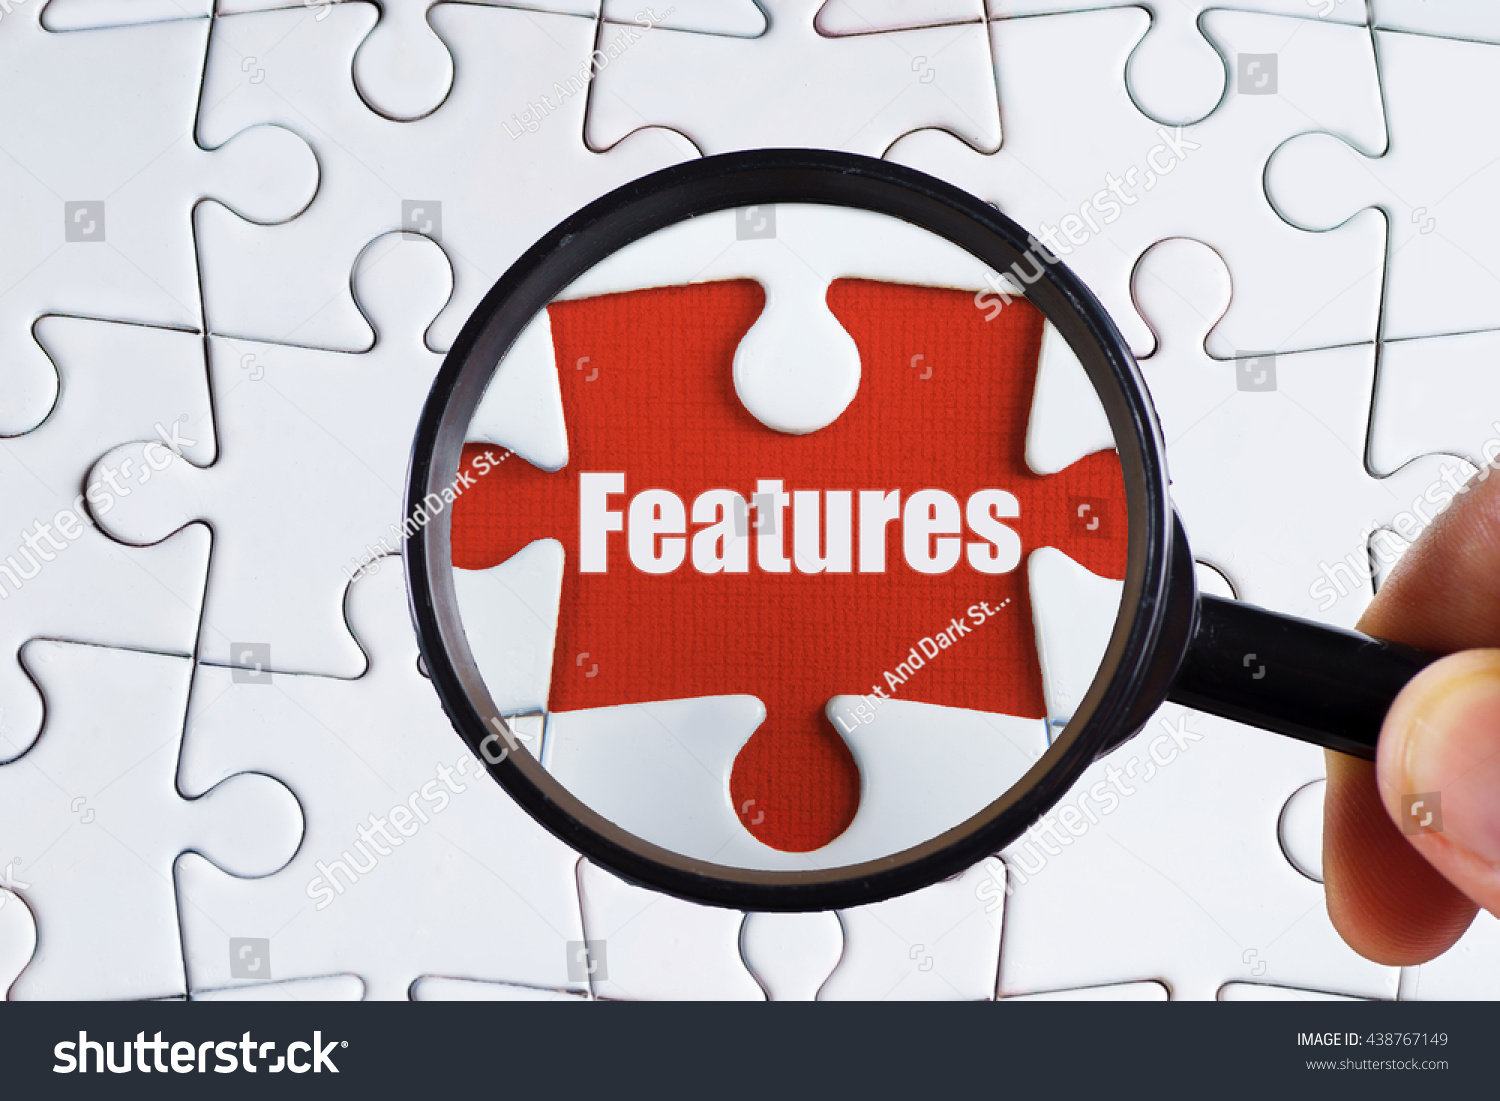 "Features" text on red missing jigsaw puzzle with man right hand hold black magnifying glass searching for missing puzzle peace - business and finance concept #438767149